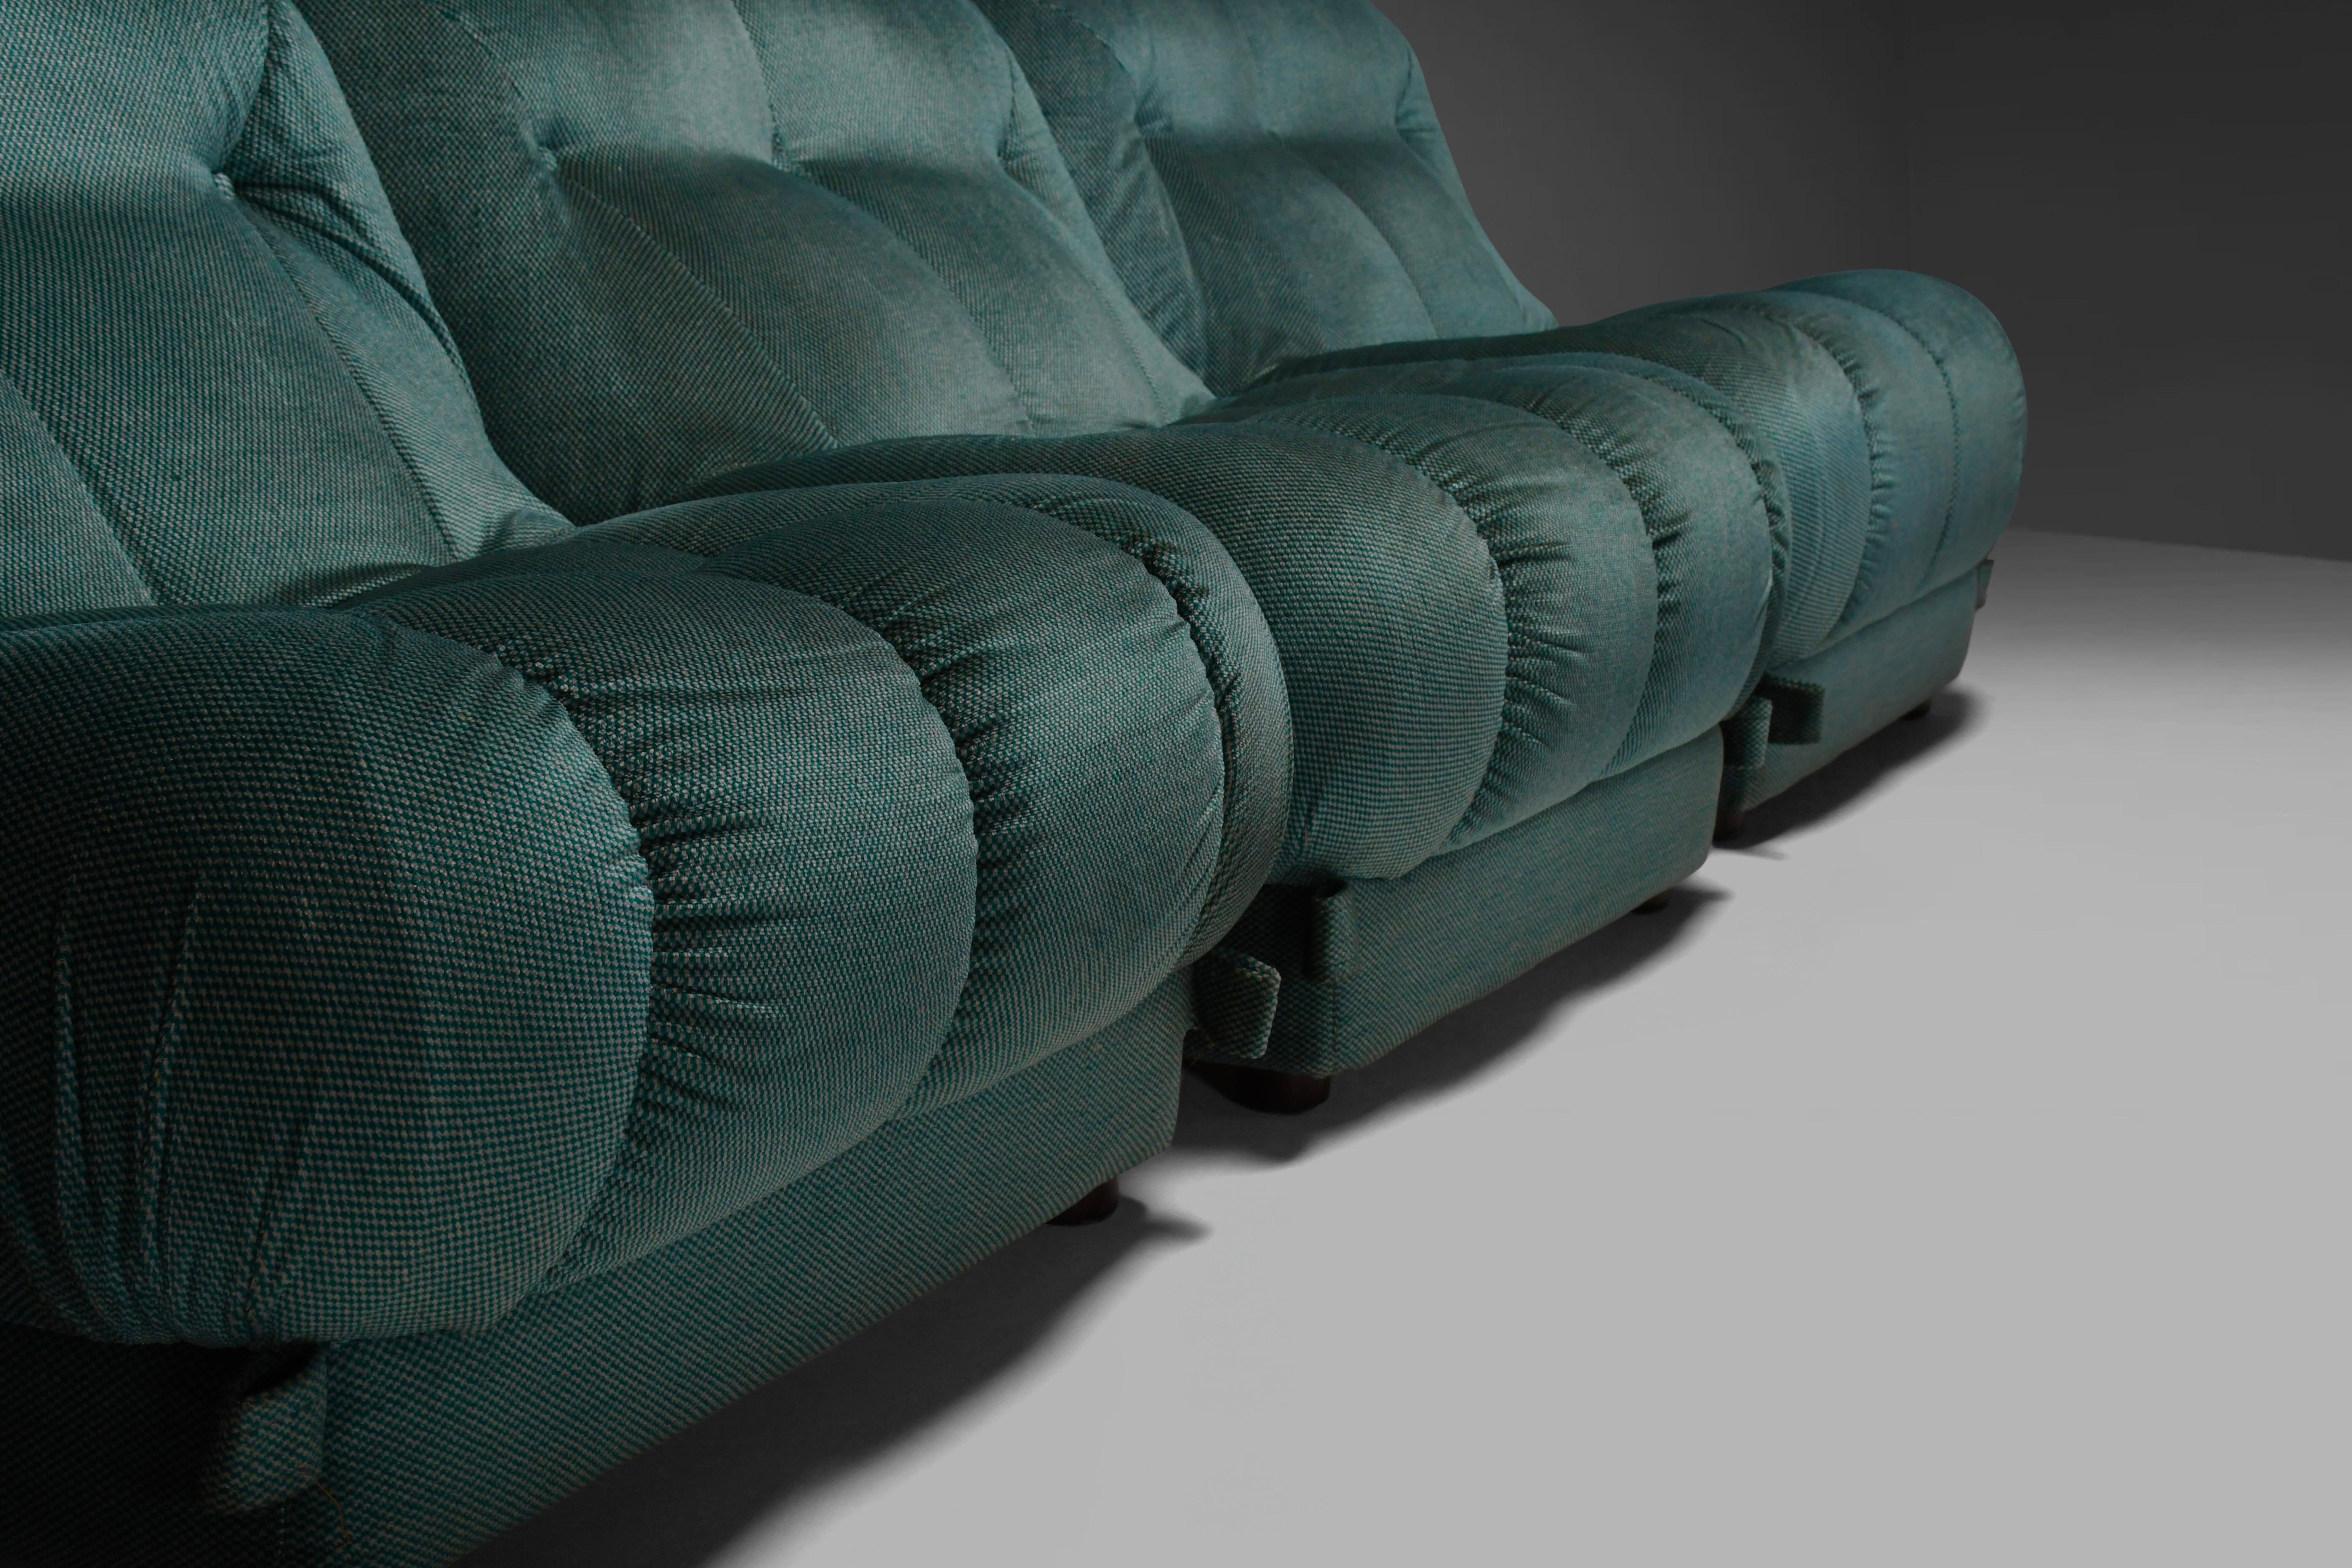 Large Modular Sectional ‘Nuvolone’ Sofa by Rino Maturi in Green Fabric, 1970s In Good Condition For Sale In Echt, NL